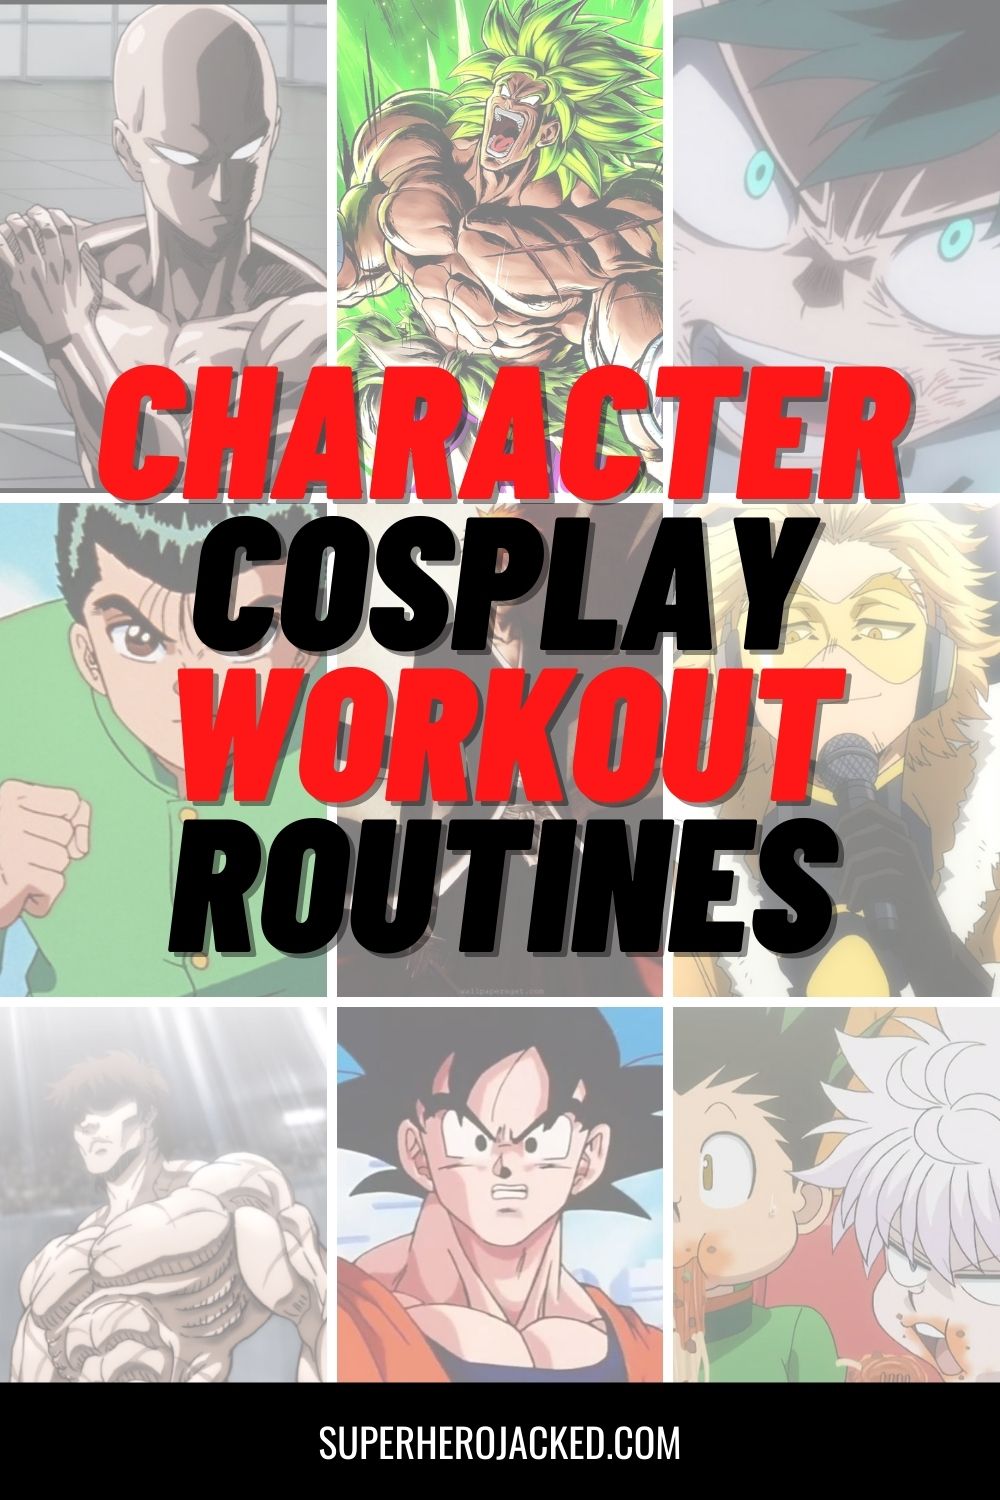 Character Cosplay Workouts